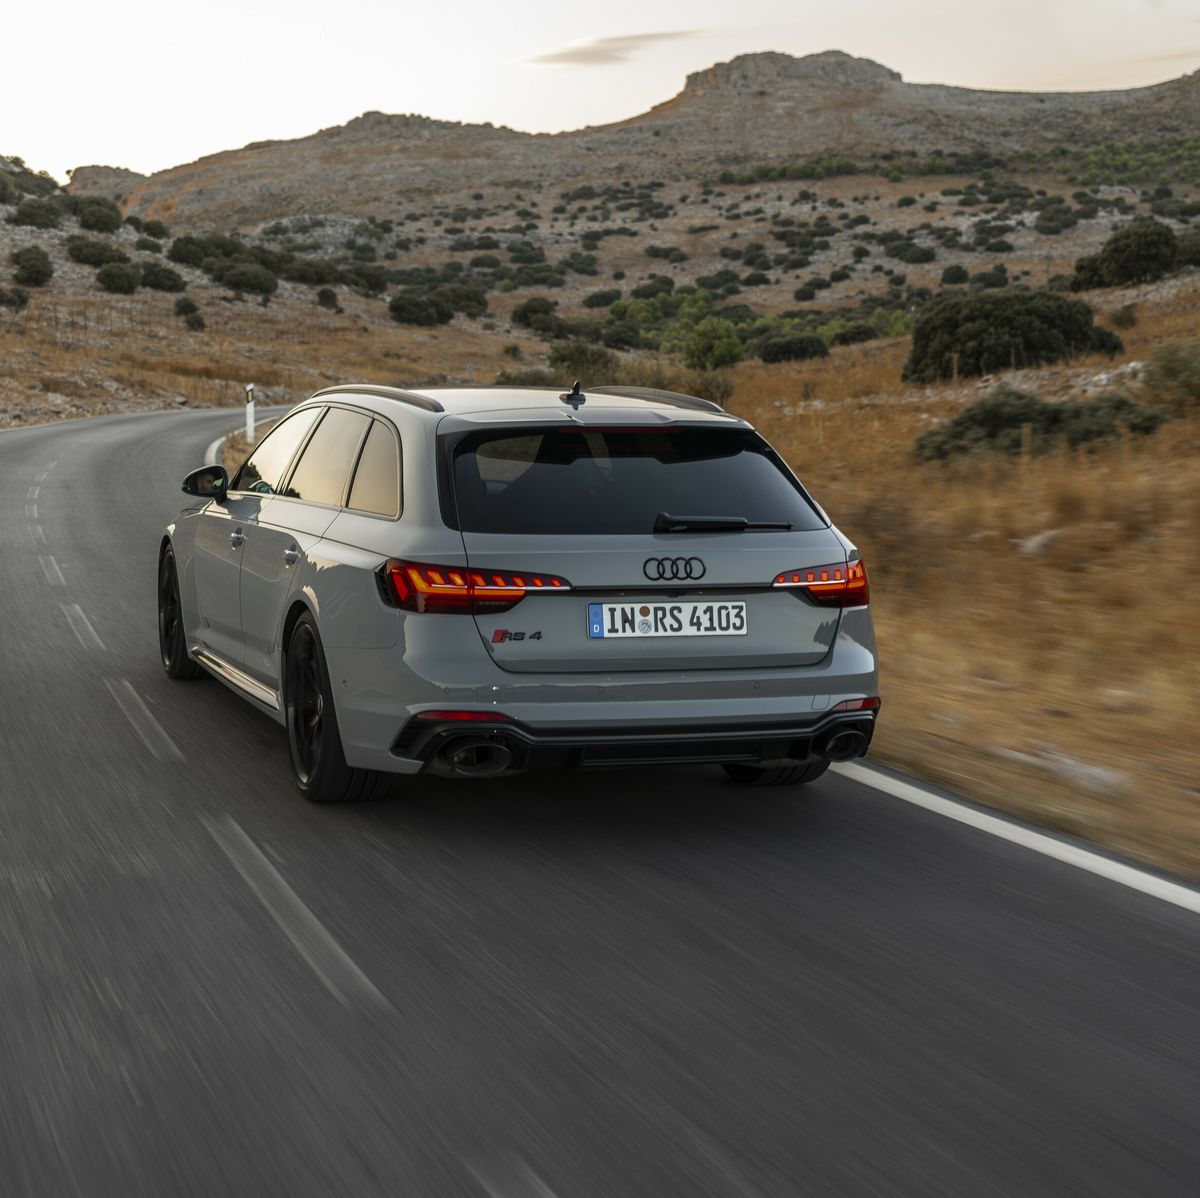 Audi RS4 Wagon 'Is Not Coming' to America, Audi Says